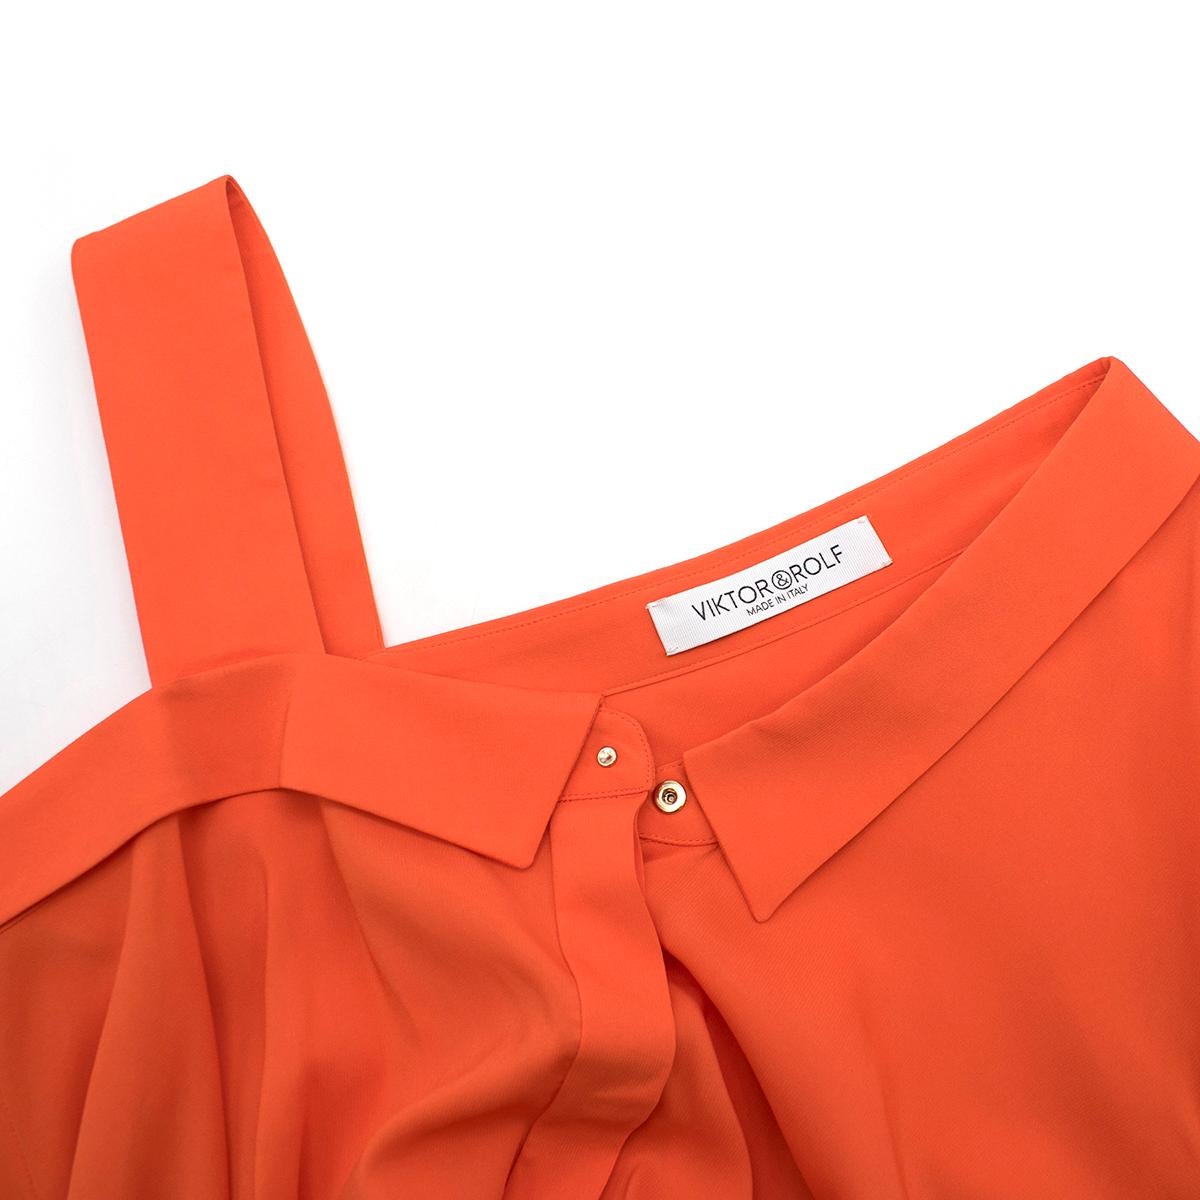 Viktor & Rolf Neon Orange Top US 6 In Excellent Condition For Sale In London, GB